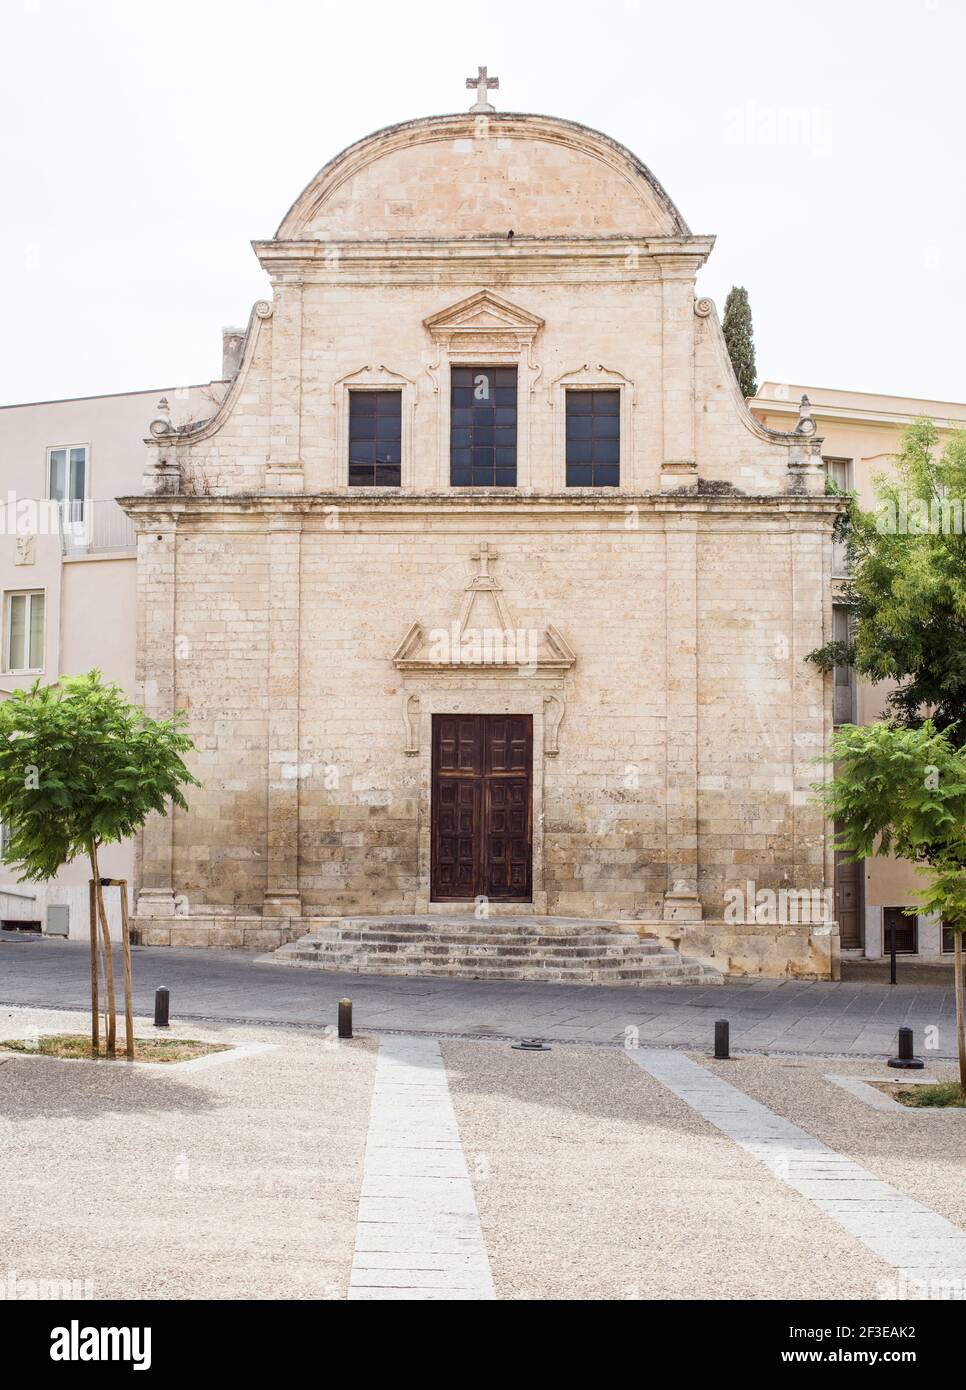 Chiesa di San Michele Church, Sassari Sardinia. It is built in front of the Cathedral of San Nicola in the Piazza Duomo district. Stock Photo